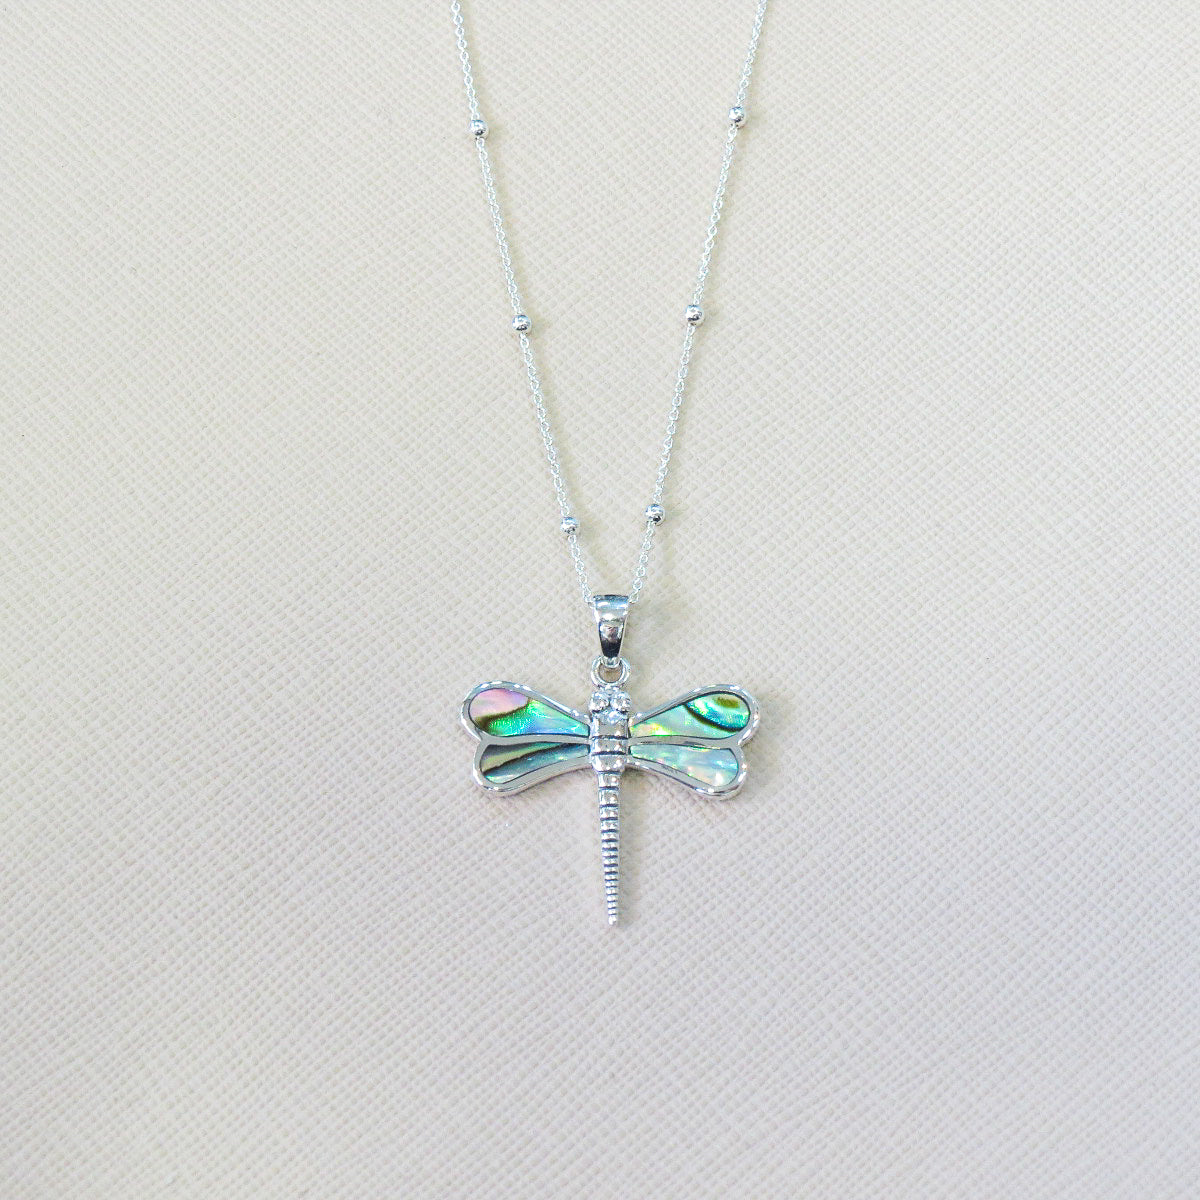 Silver and Paua Shell Dragonfly Pendant with Chain